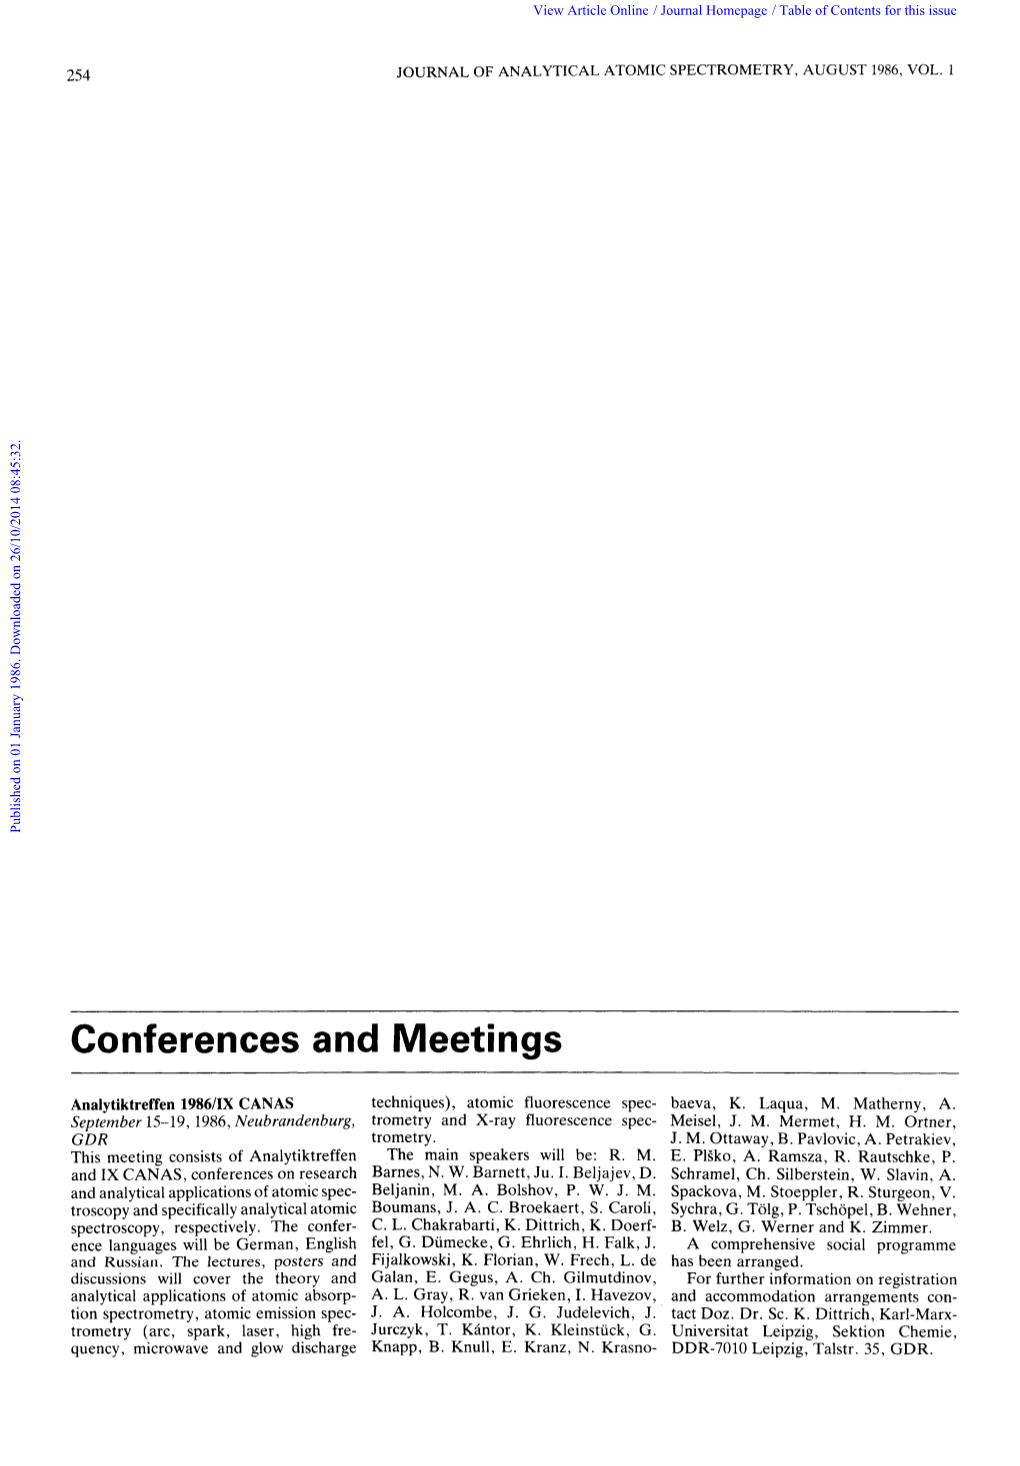 Conferences and Meetings